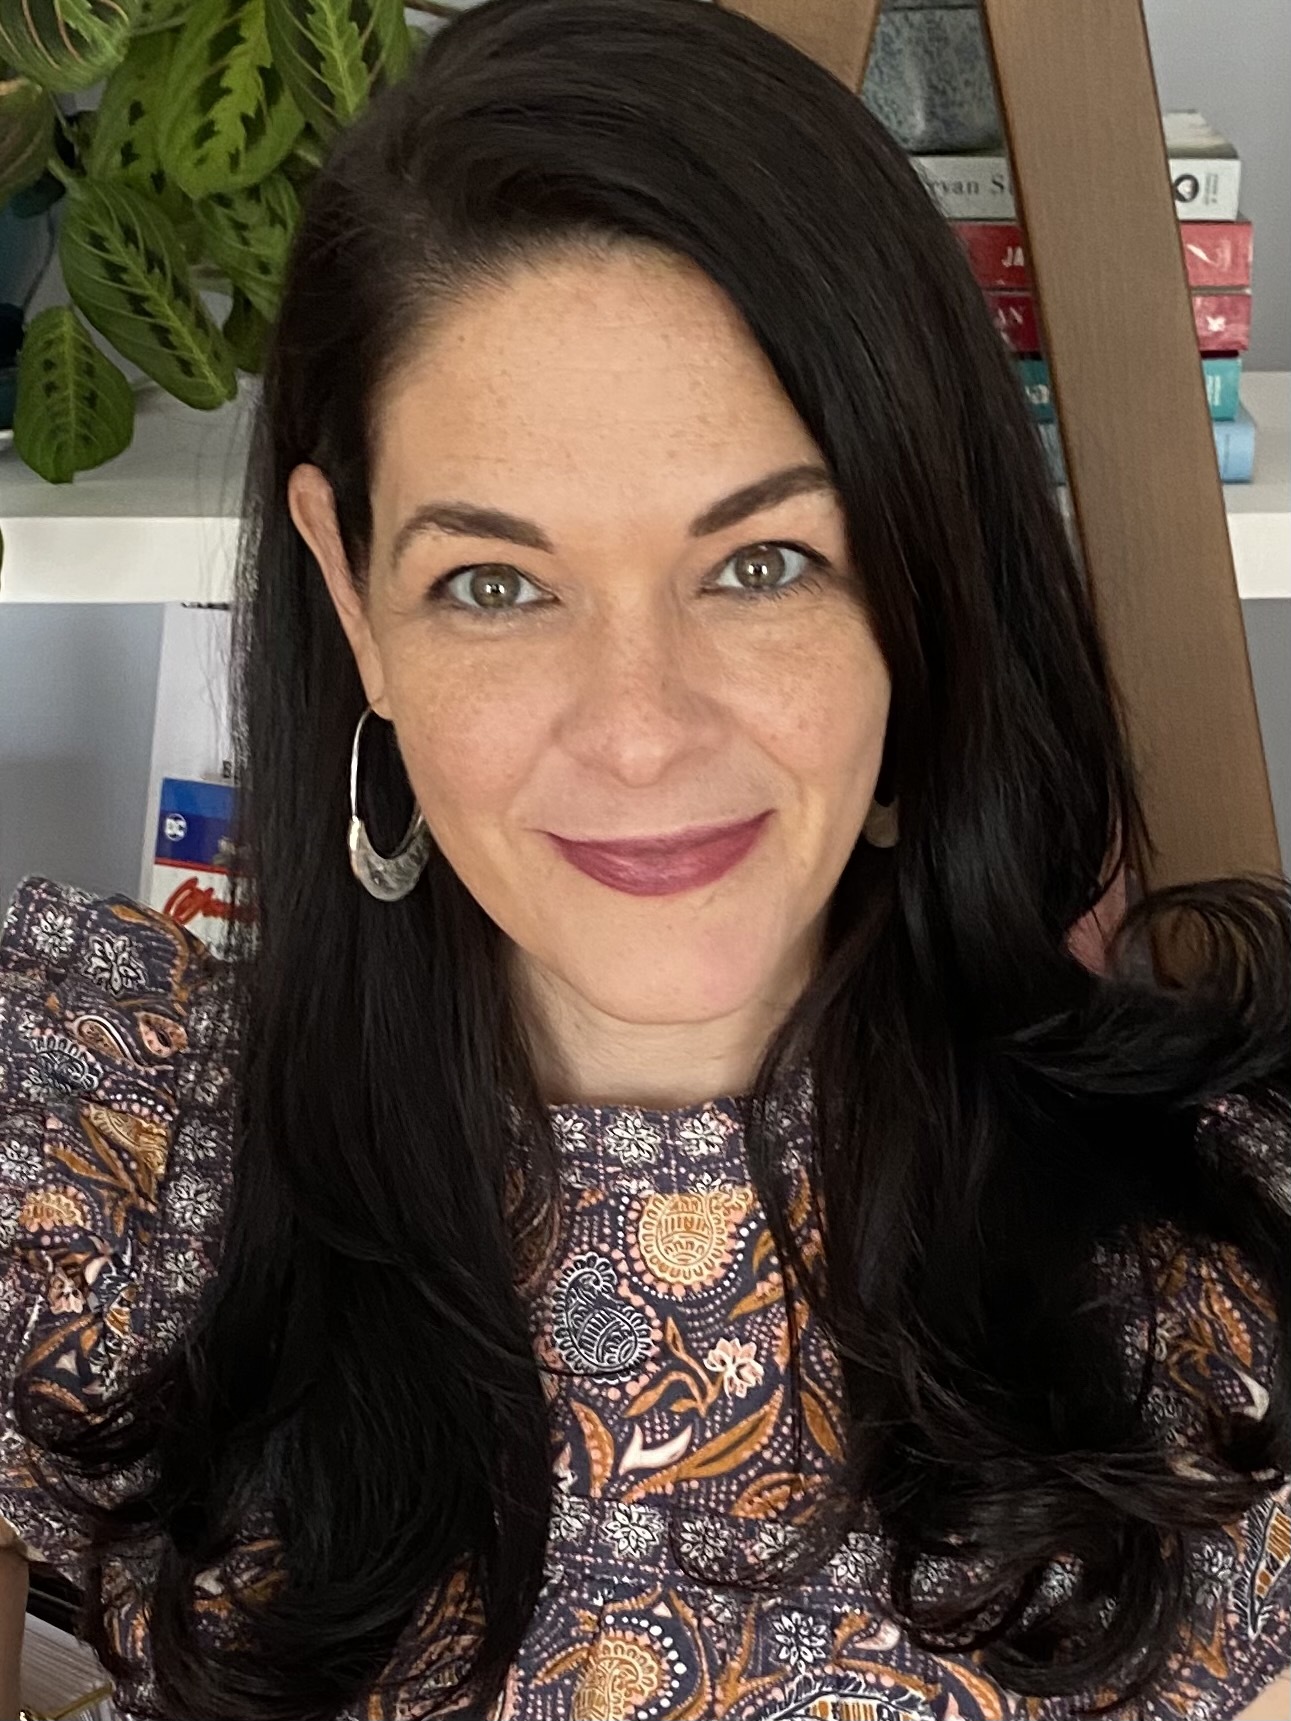 Smiling dark haired woman with earrings and a paisley printed top